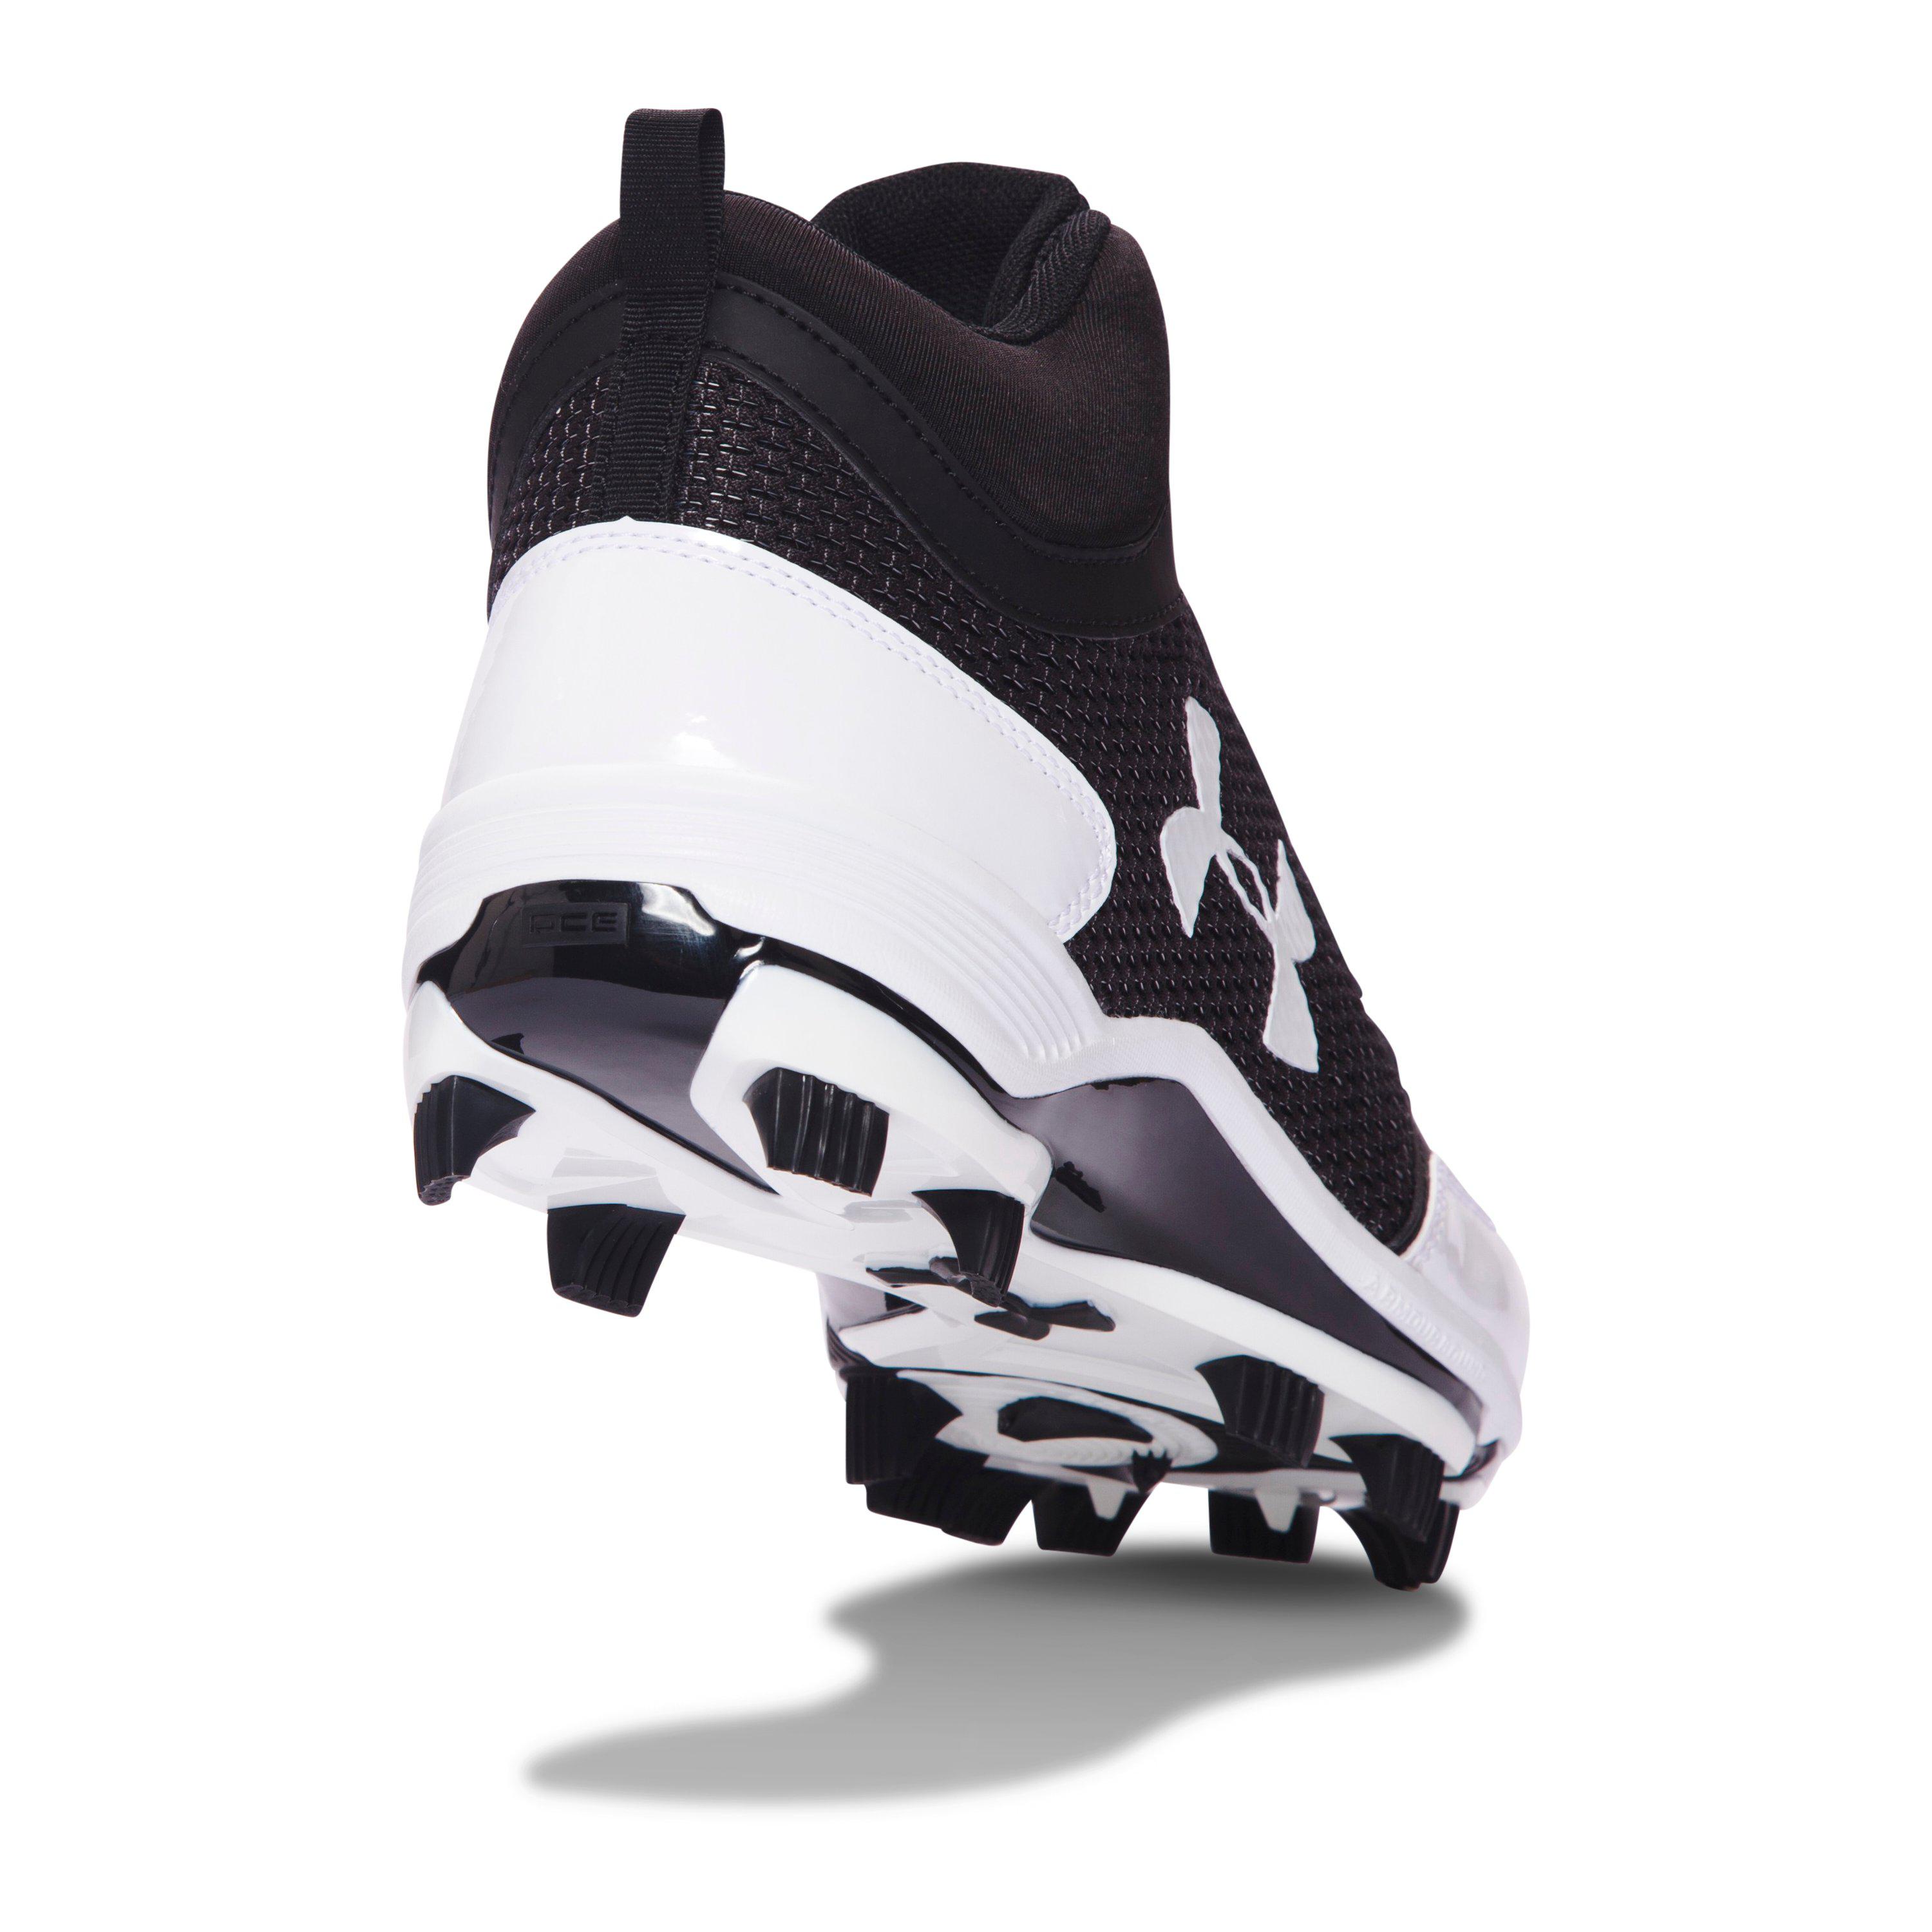 Under Armour Men's Ua Heater Mid Tpu Baseball Cleats for Men | Lyst